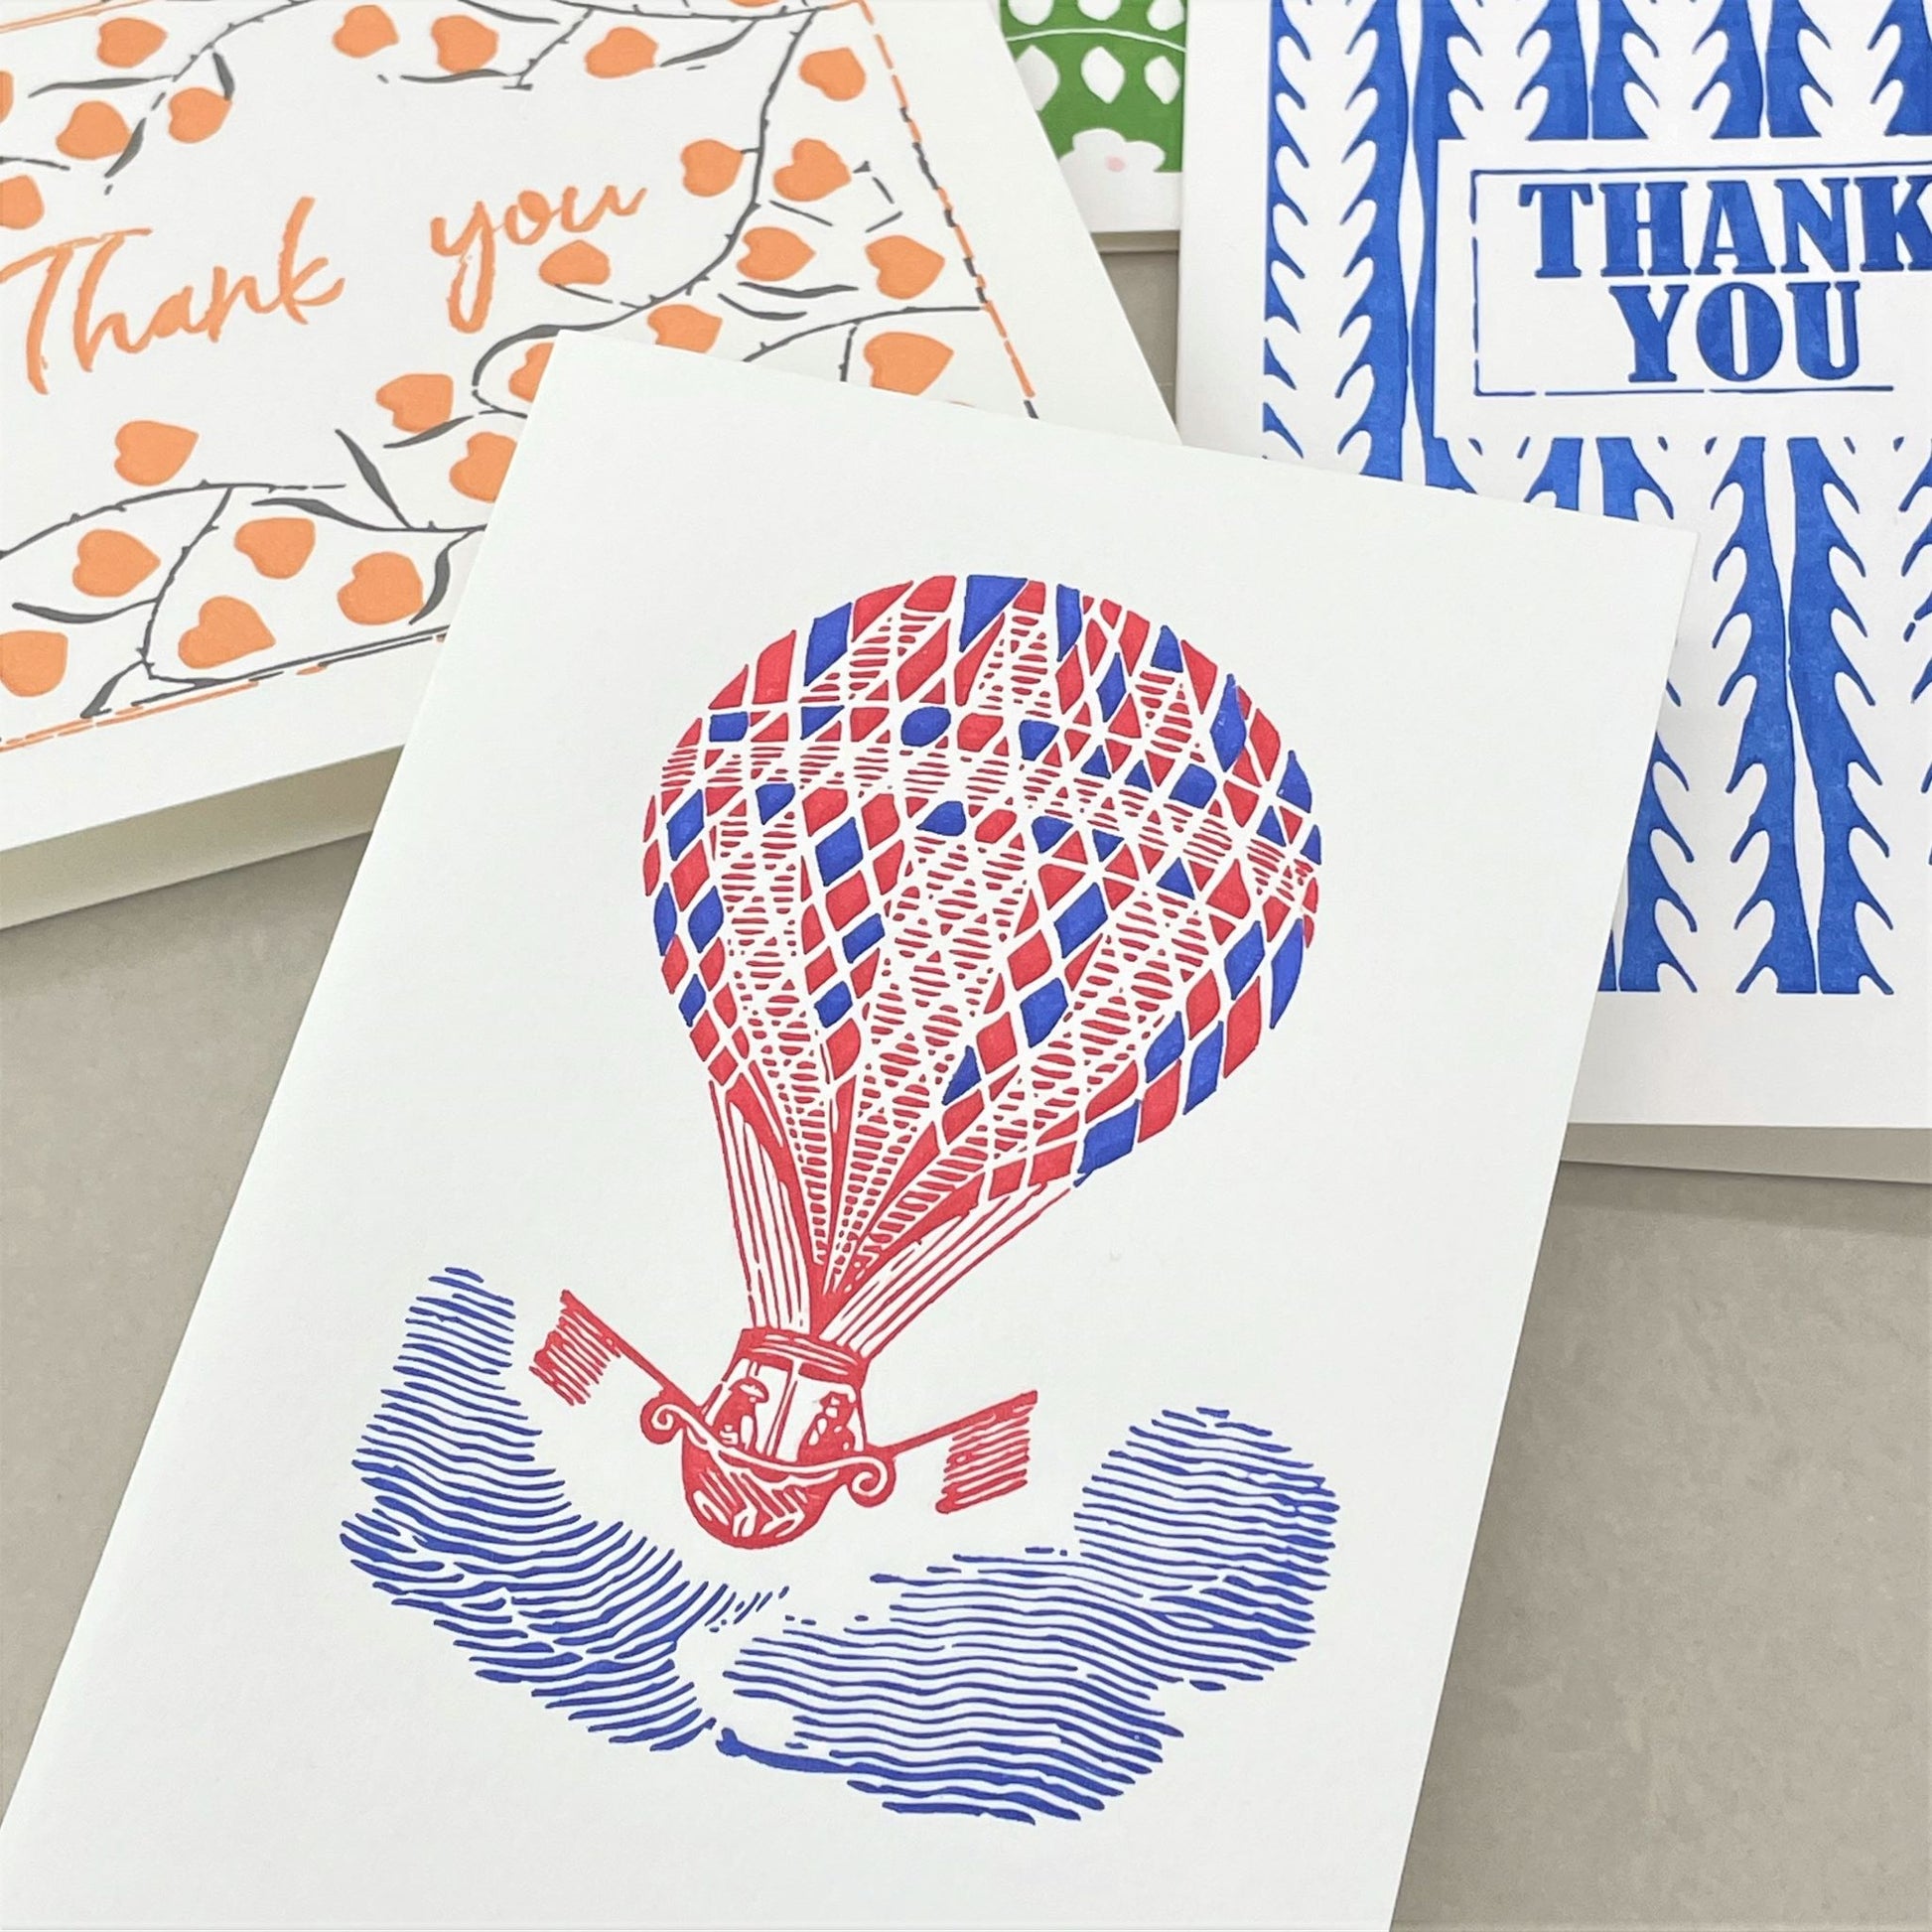 small greetings card of a red and blue hot air balloon shown with other cards